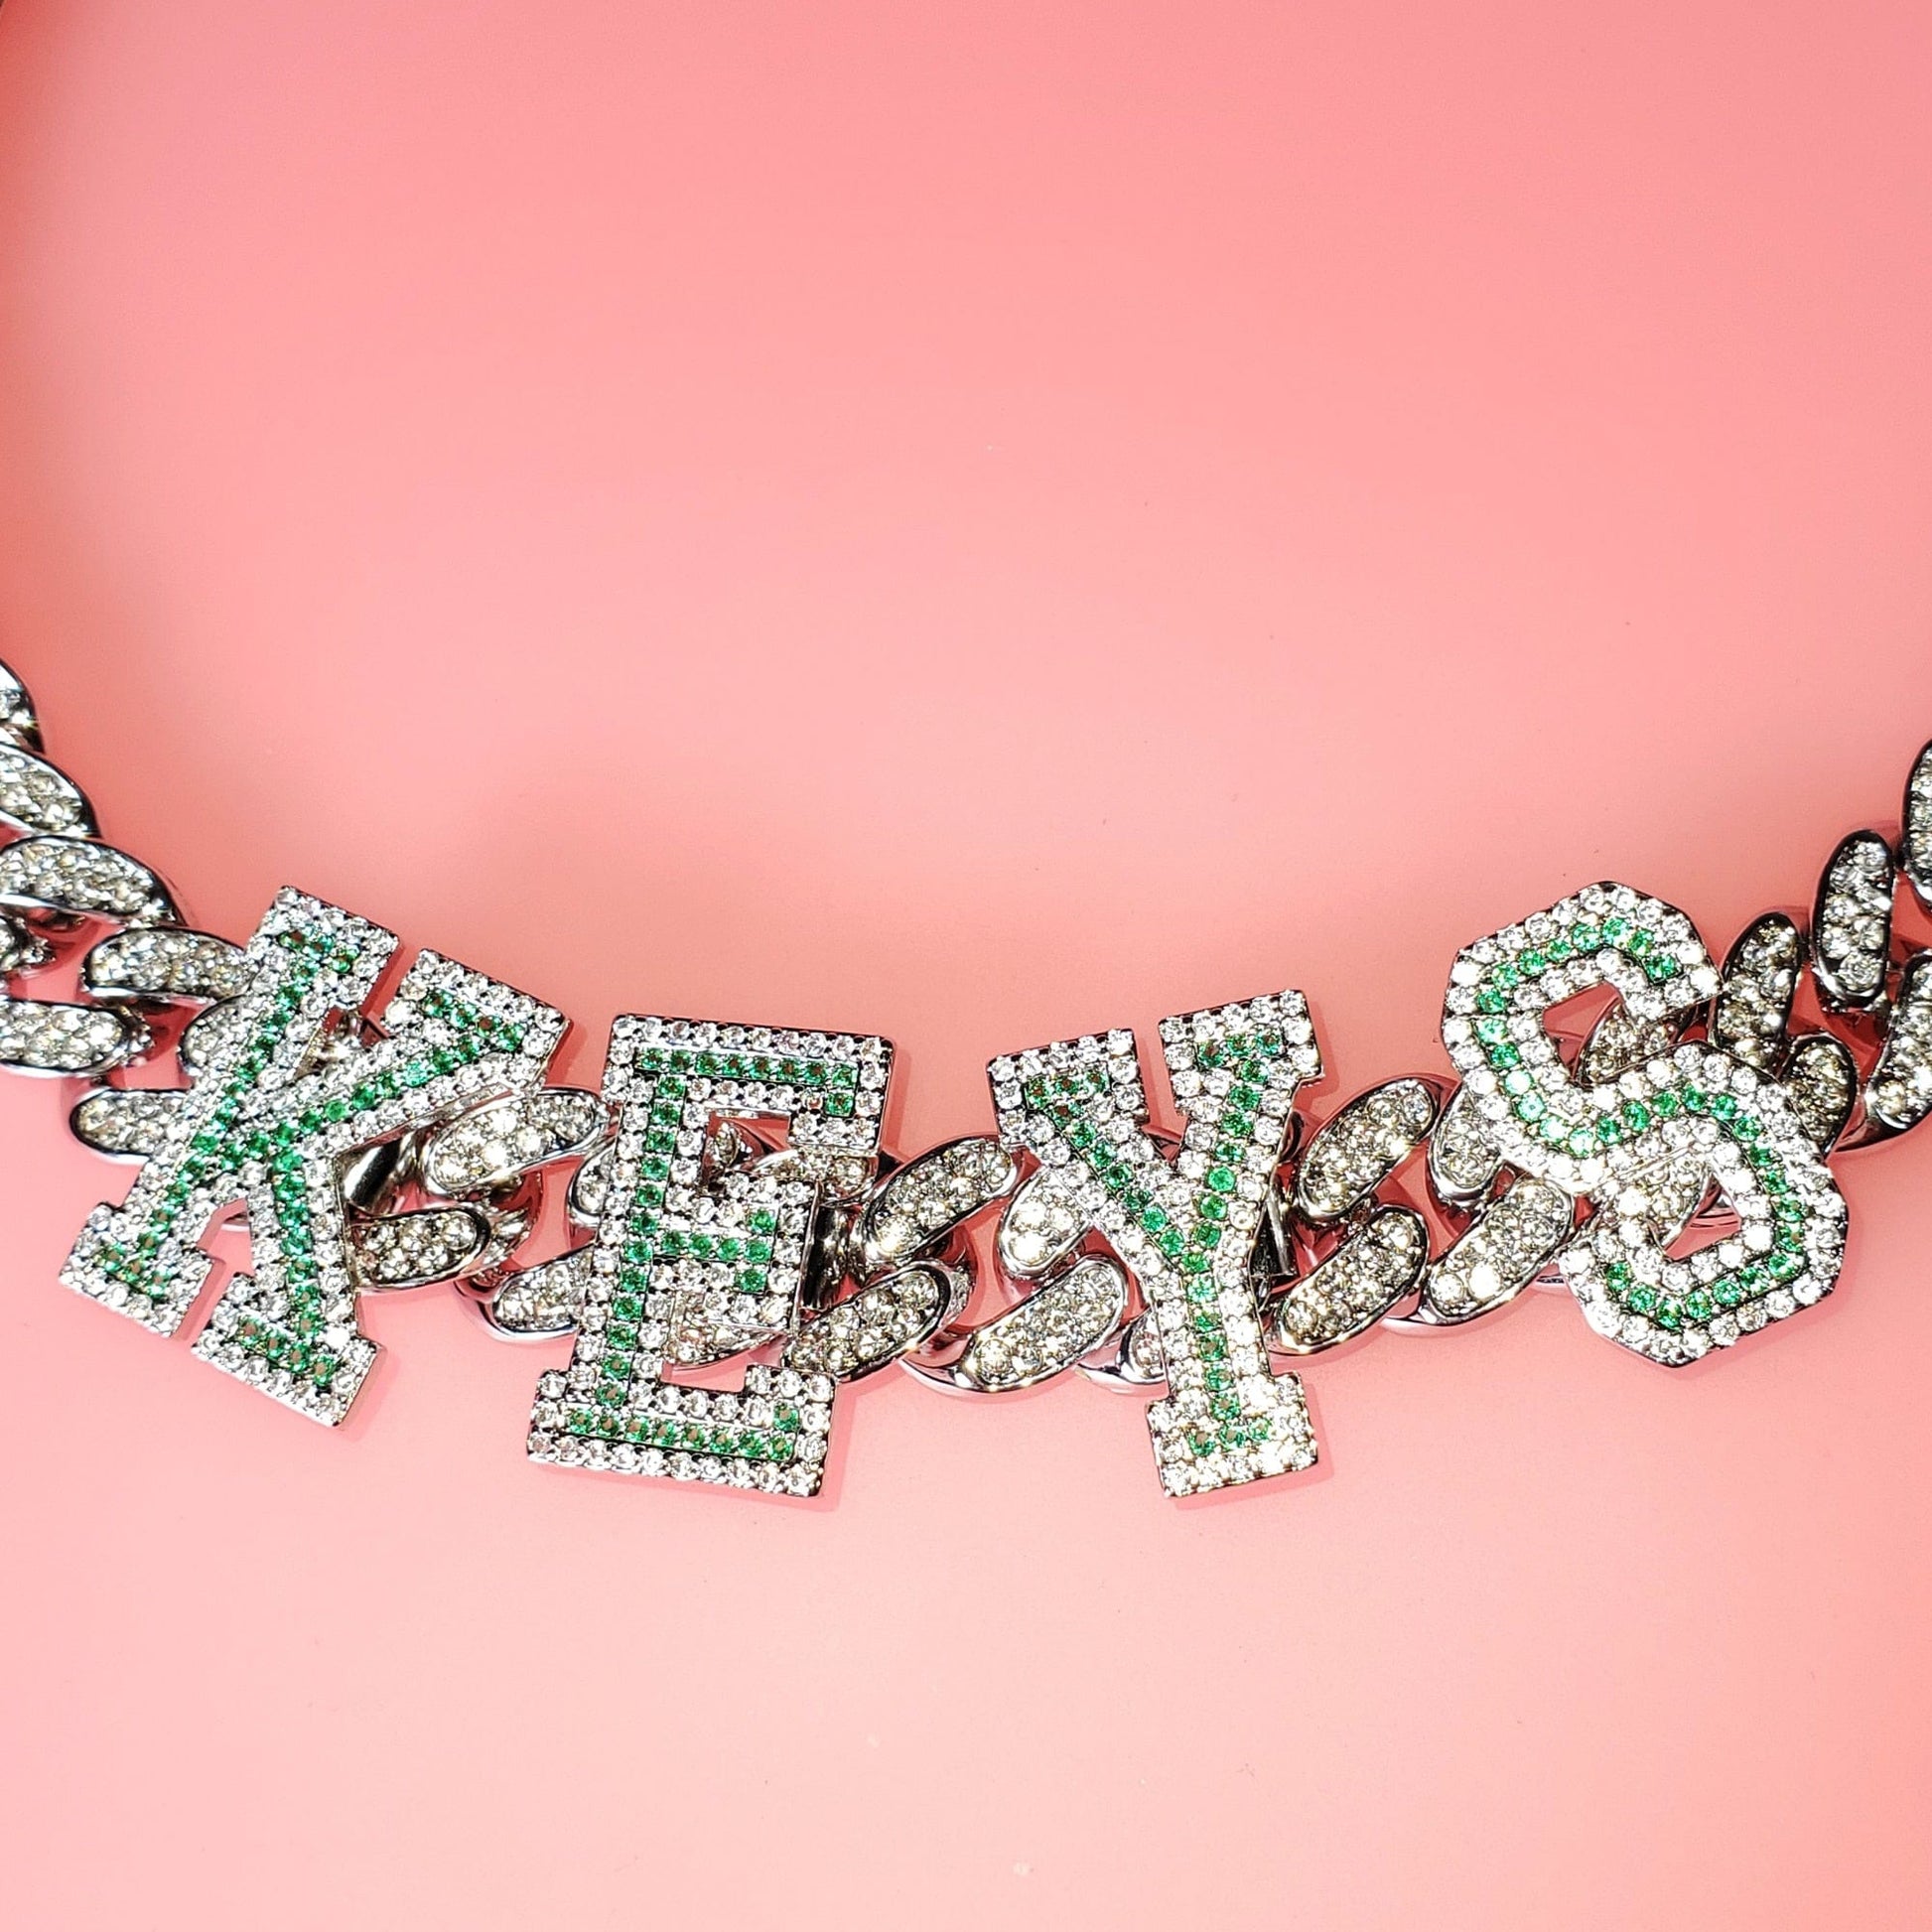 'All Star' Green CZ Custom Name Curb Choker Necklaces by Bling Addict | BlingxAddict